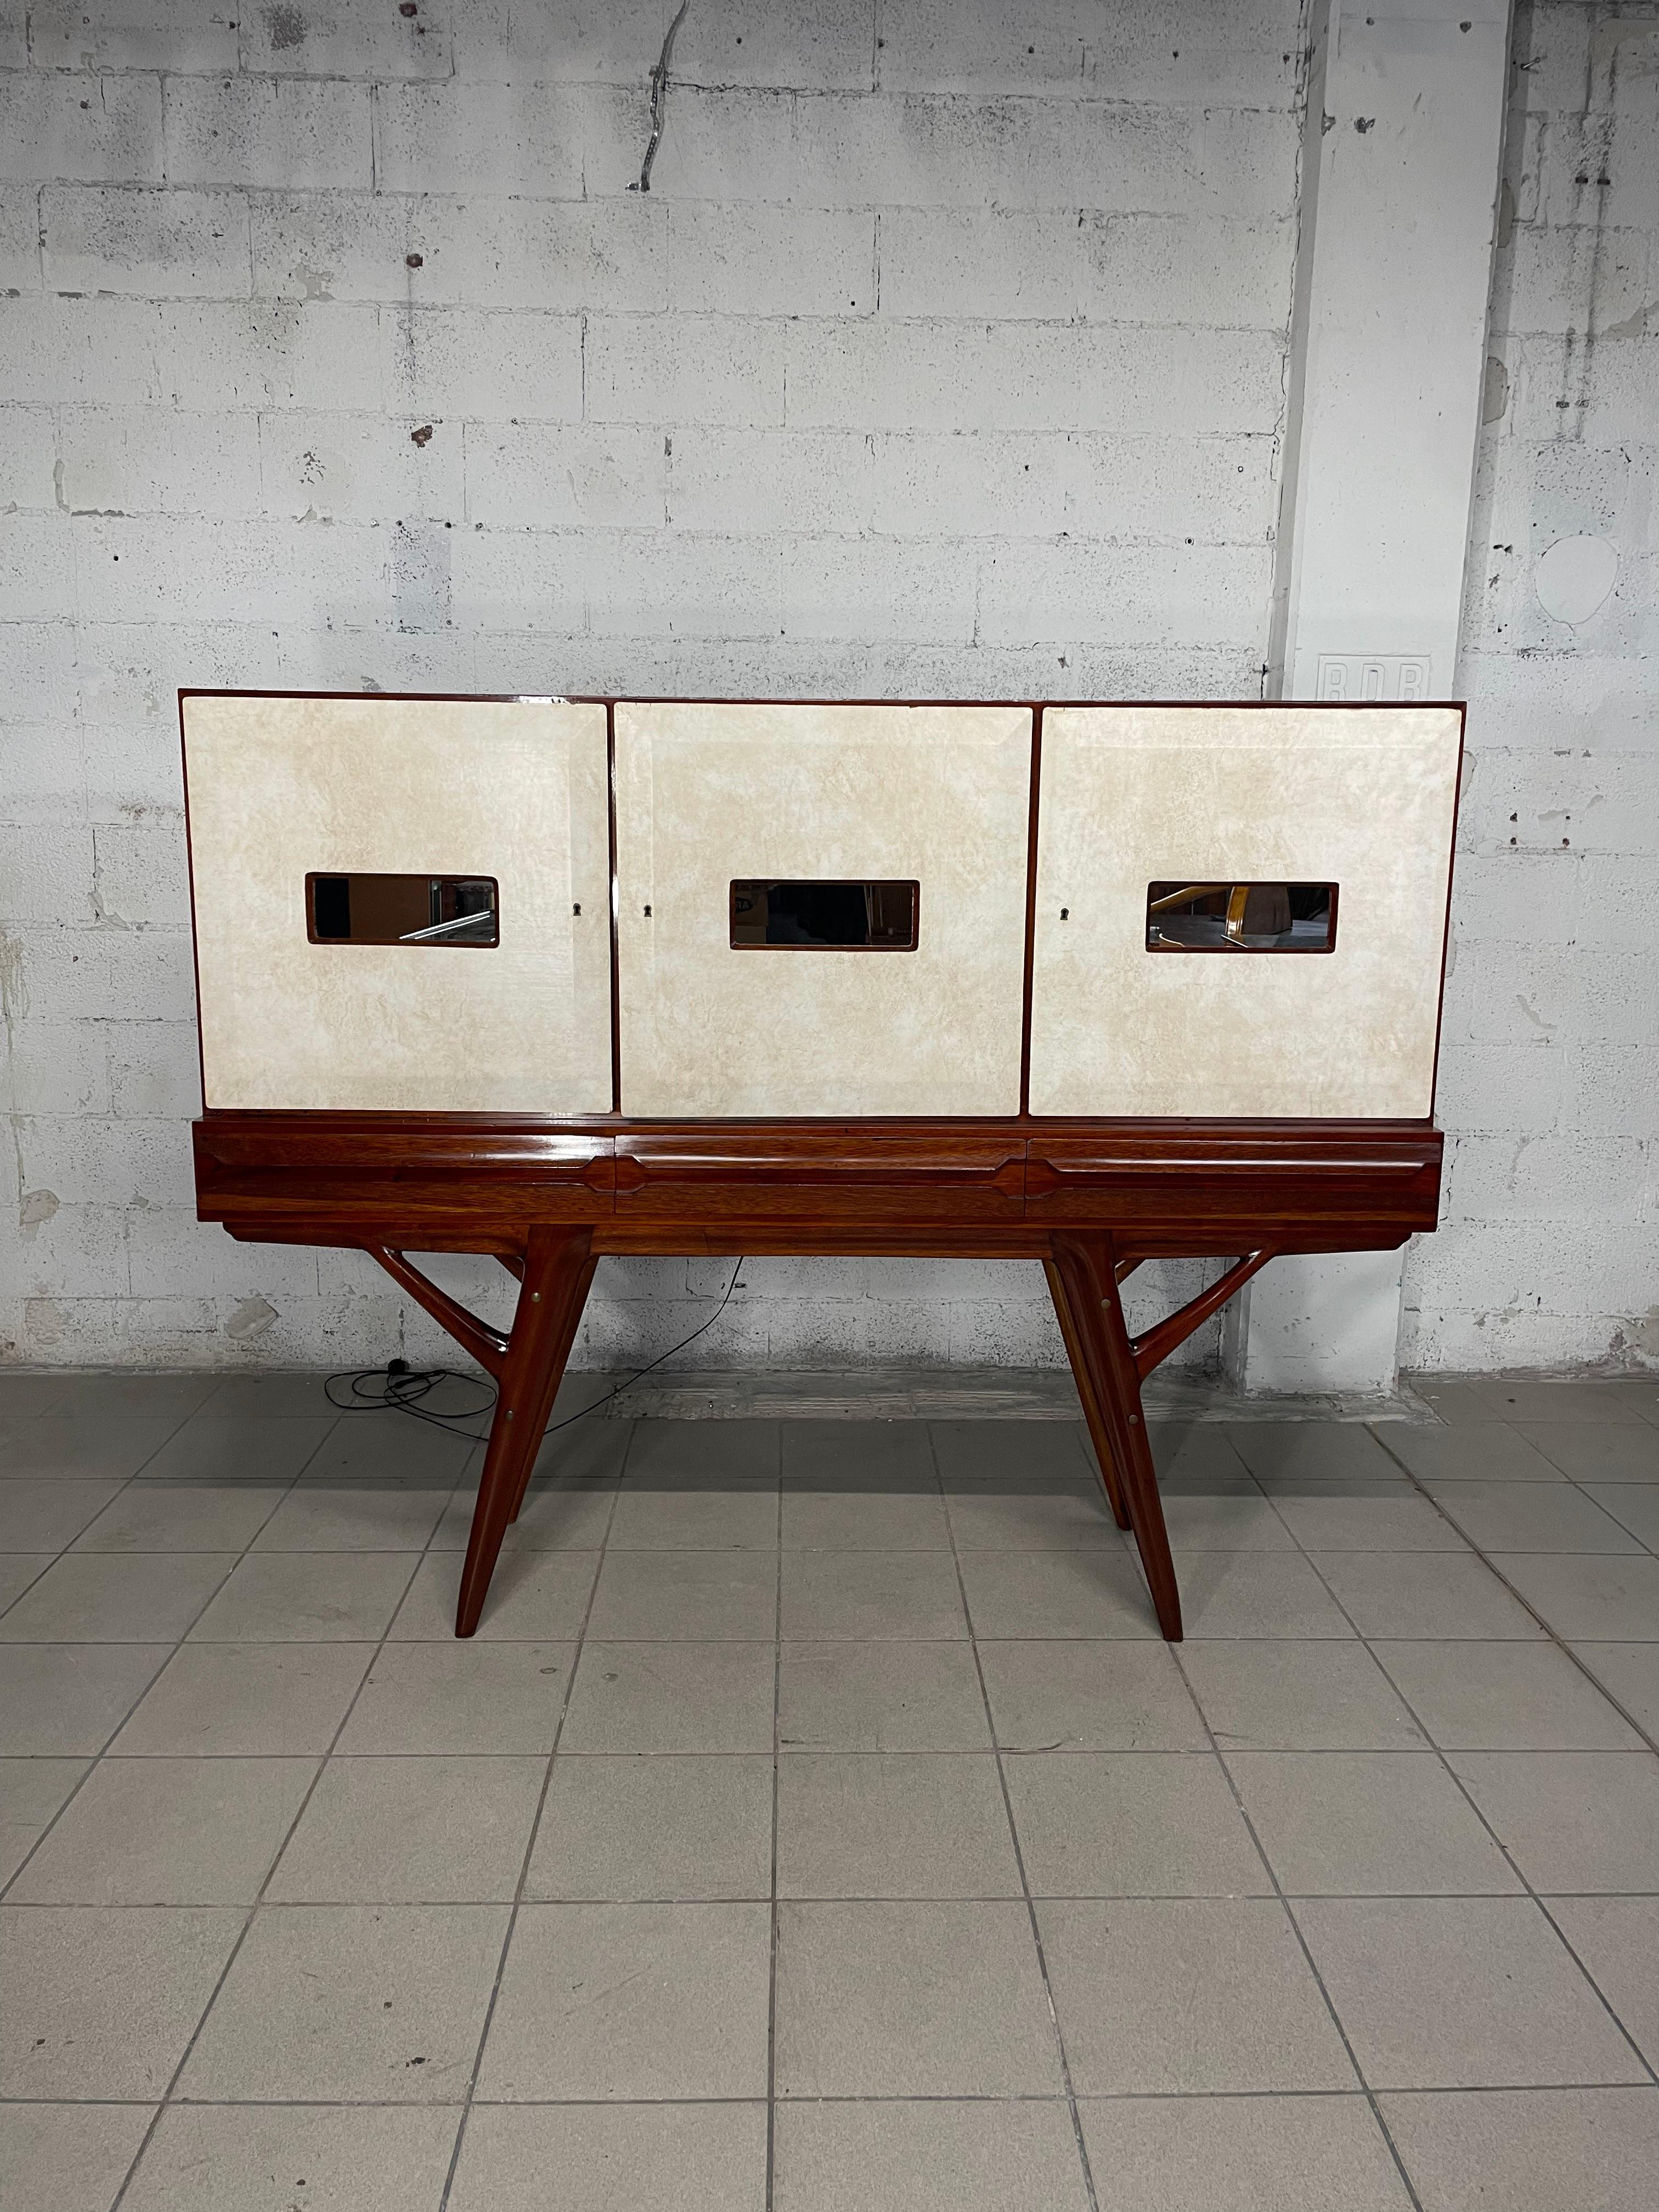 1950s sideboard with mahogany wood frame and parchment-covered doors with central panes of mirrored glass.

In addition to the 3 doors, there are 3 drawers at the base and mirrored interiors that can transform the sideboard into a bar cabinet.

The